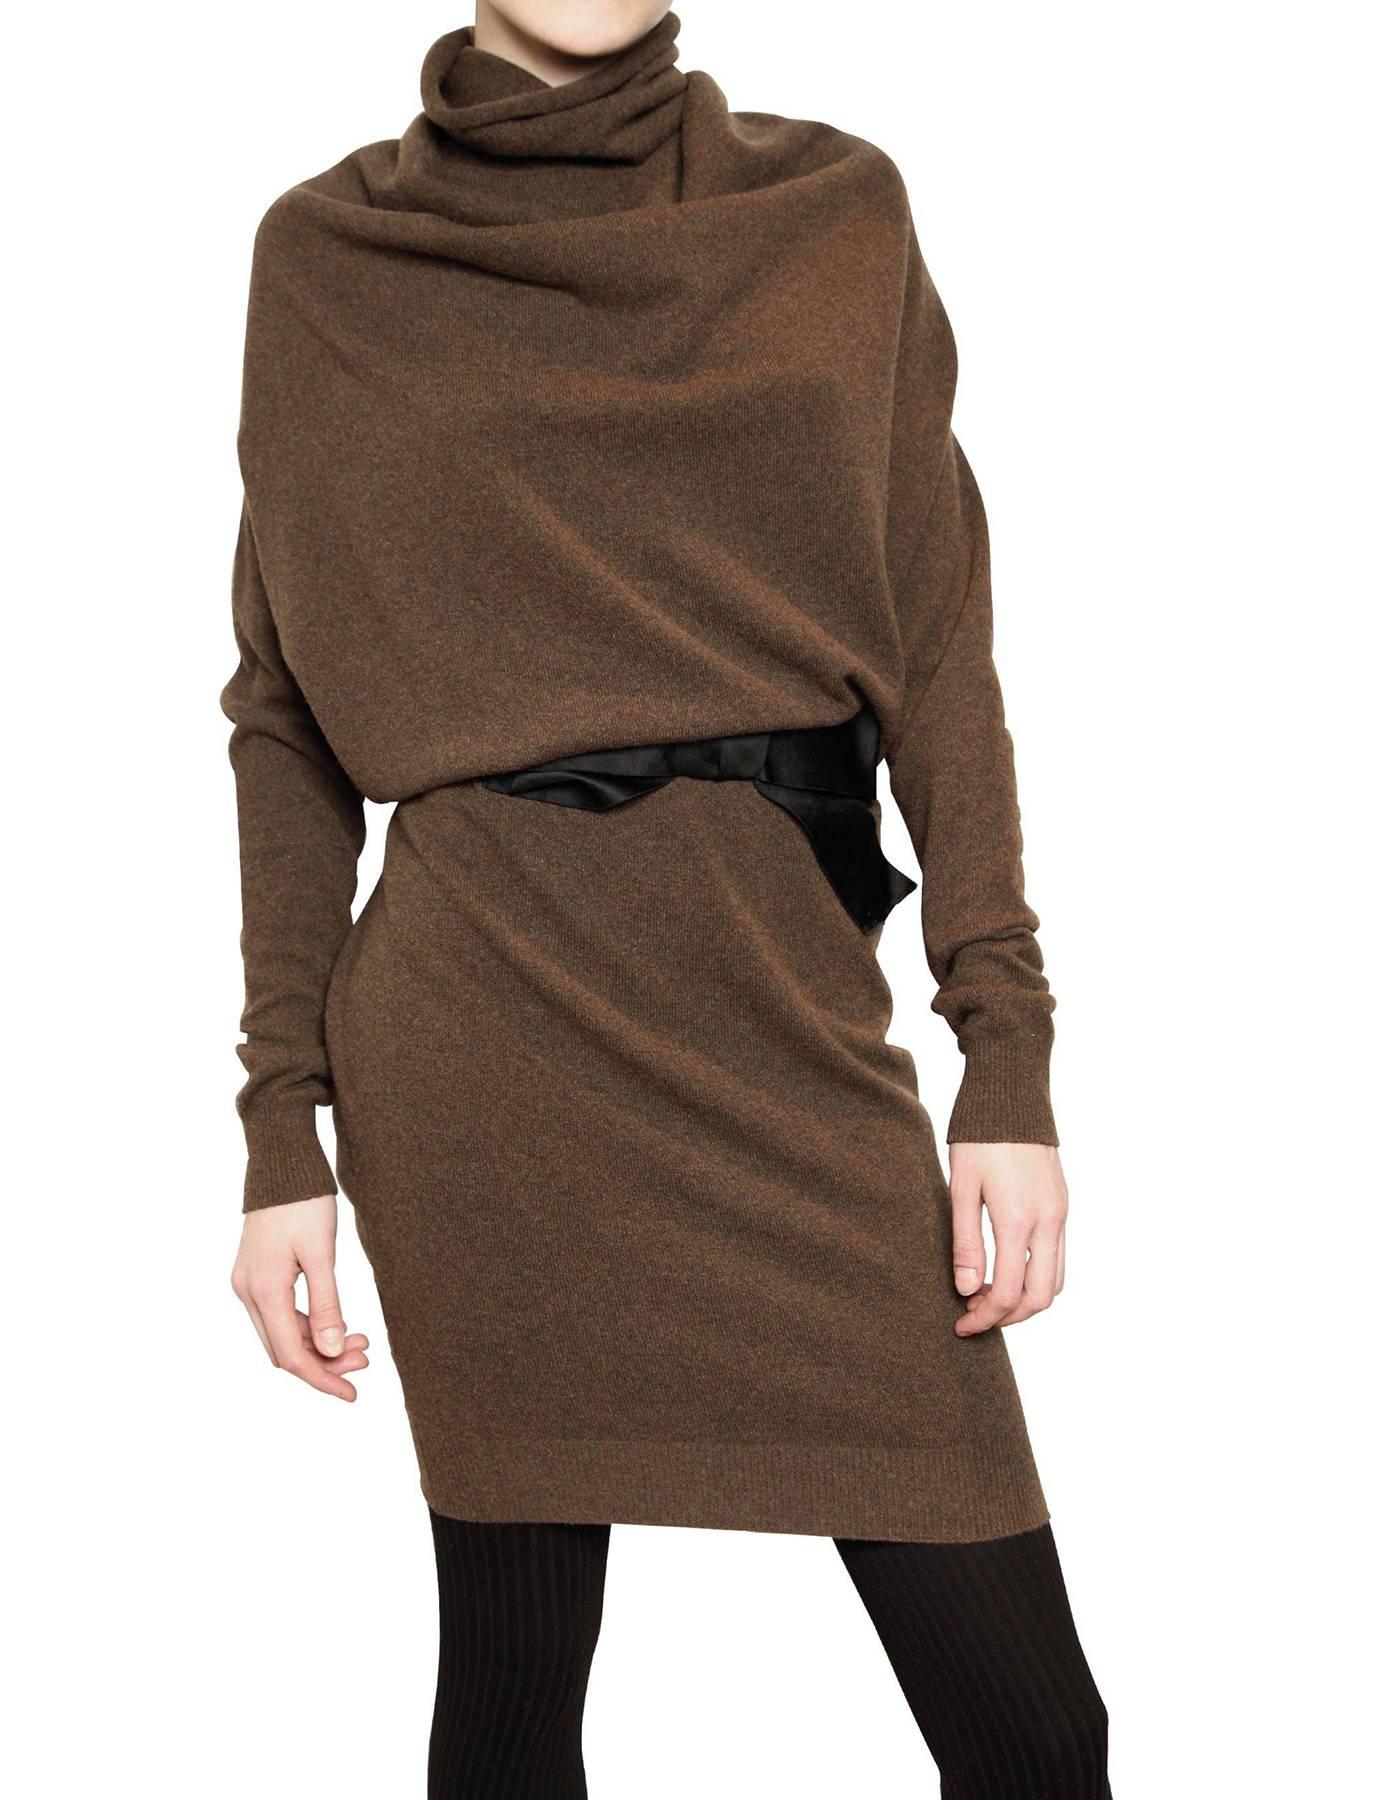 Lanvin Brown Cashmere Draped Over Shoulder Sweater Dress 

Made In: Italy
Color: Brown
Composition: 70% wool, 30% cashmere
Lining: None
Closure/Opening: Pull over
Exterior Pockets: None
Interior Pockets: None
Retail Price: $1,670 + tax
Overall